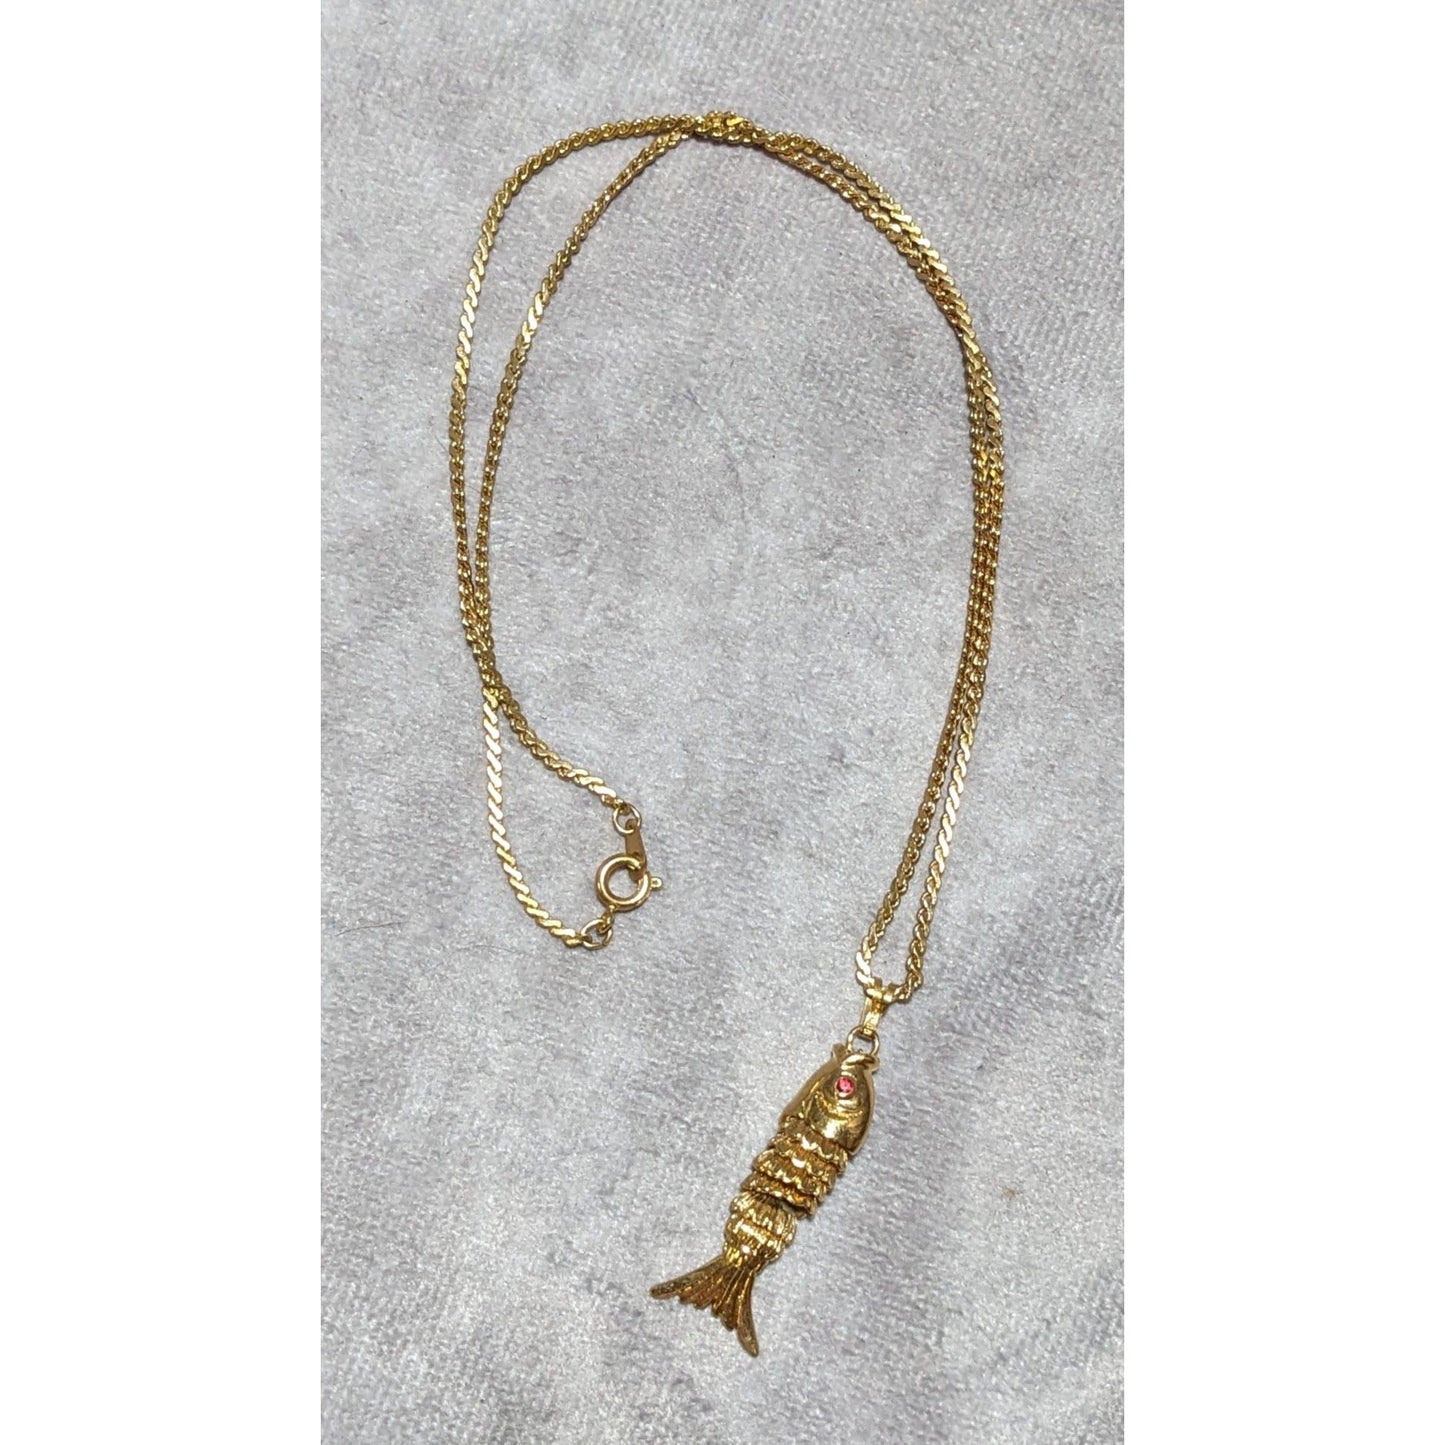 Vintage Monet Gold Articulated Fish Necklace